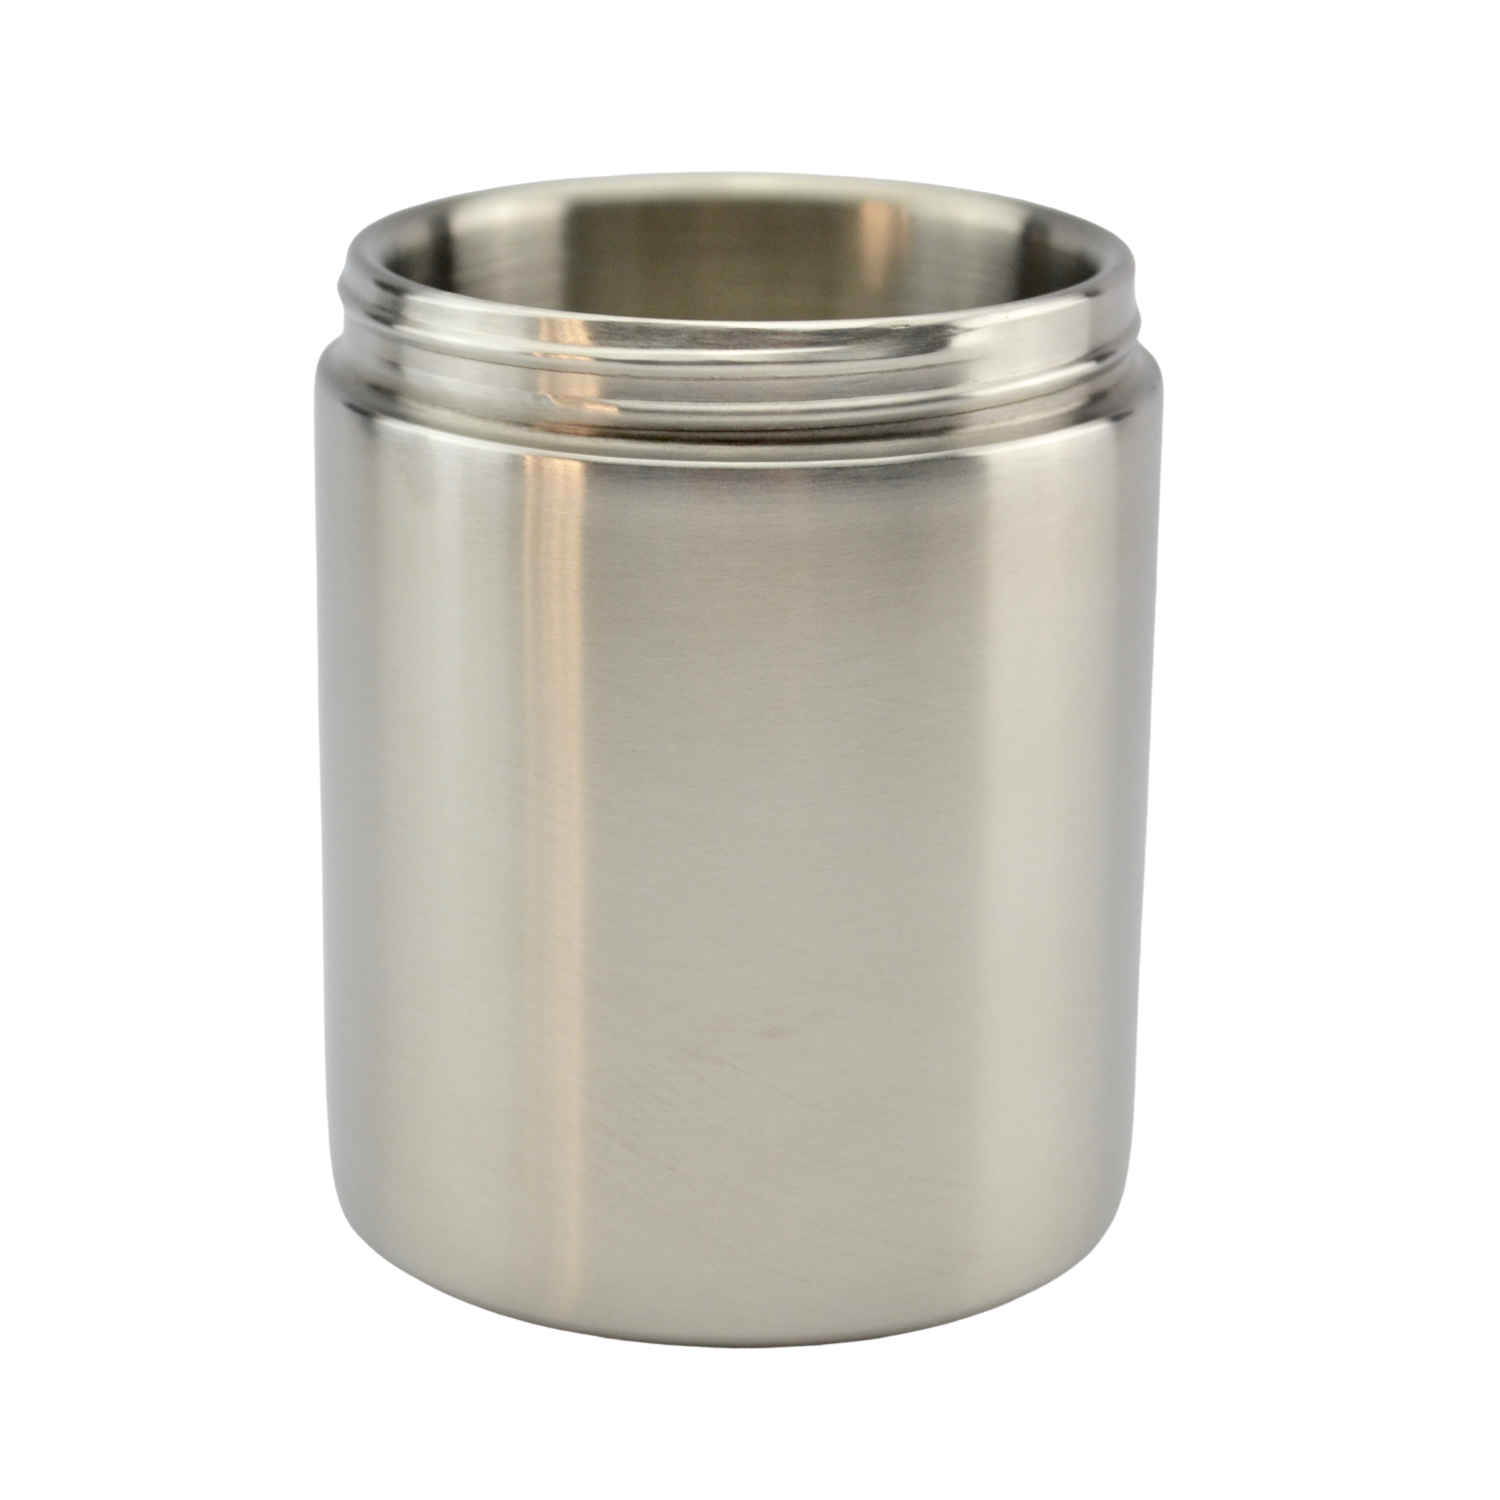 OE Lido Replacement Grounds jar - Stainless Steel